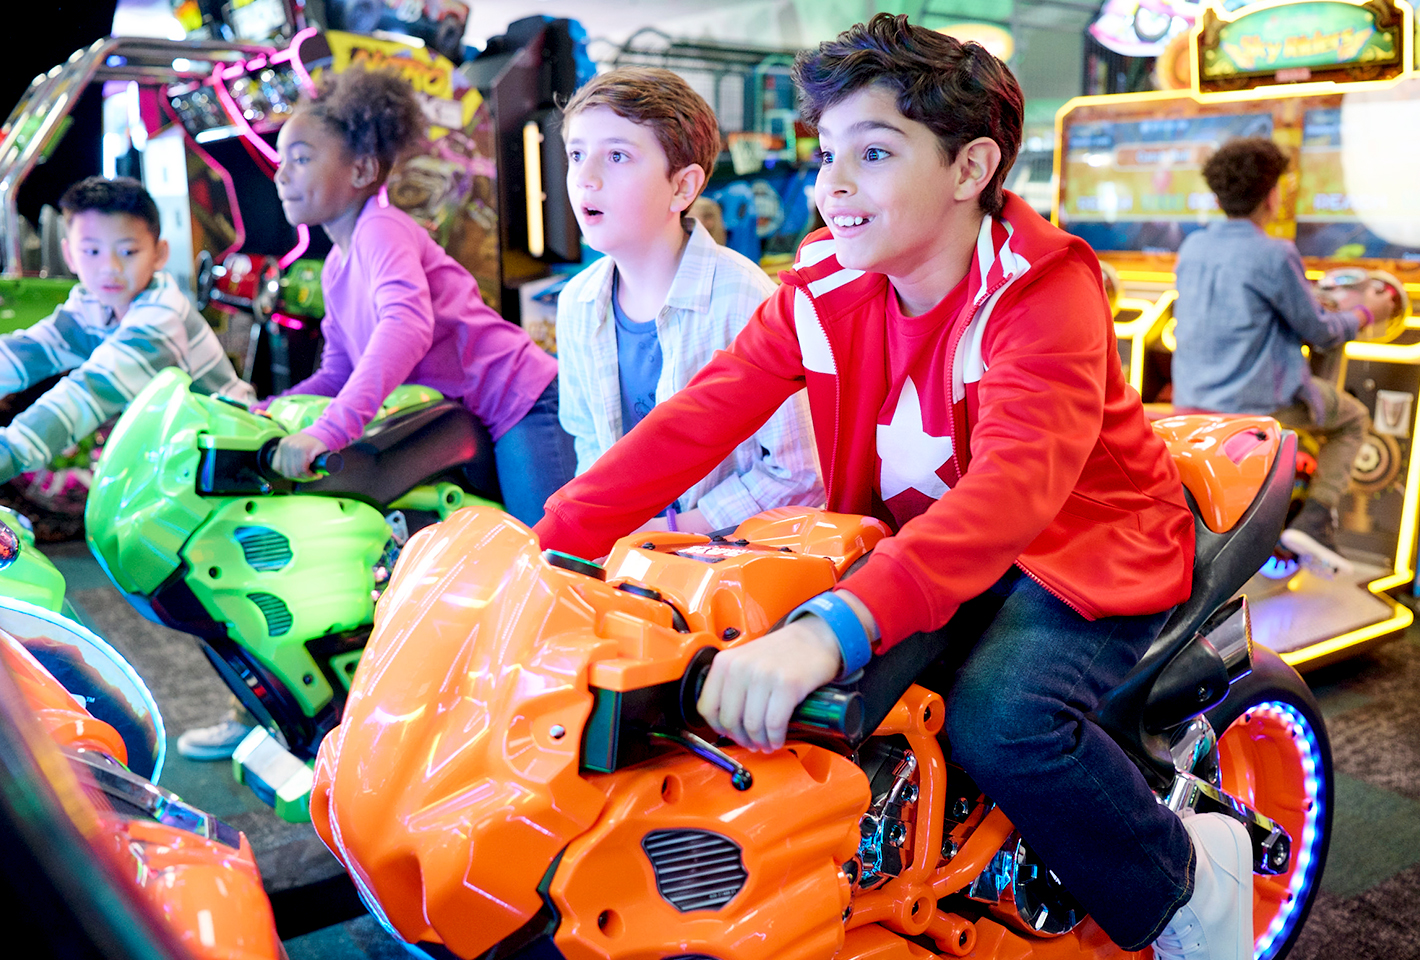 A group of kids playing the motorcycle race game